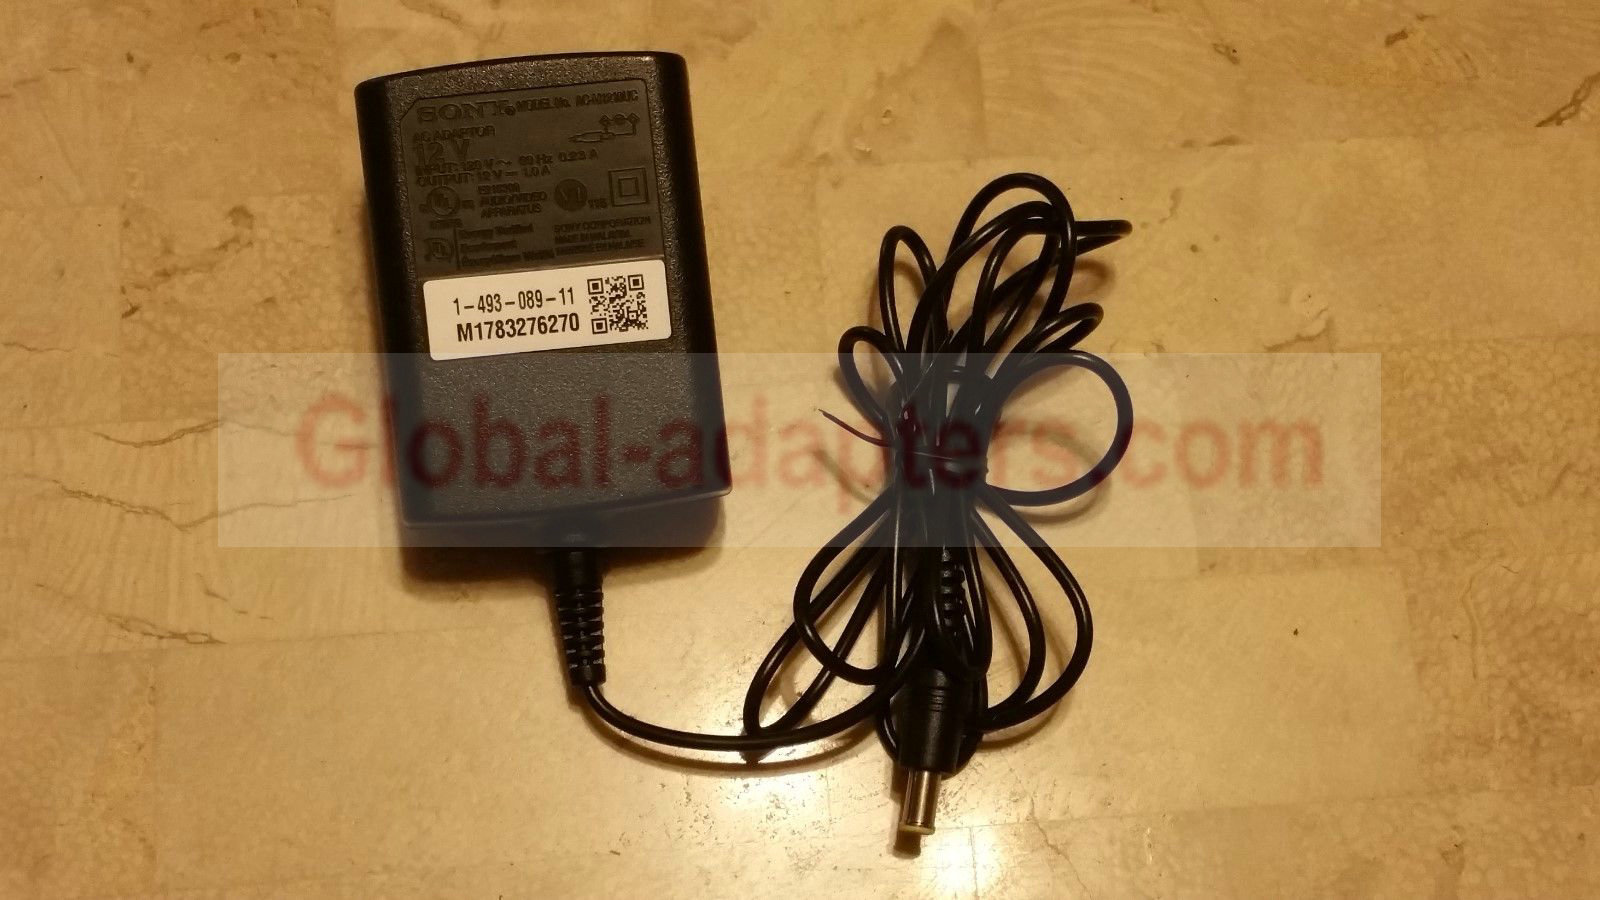 New 12V 1A Sony AC-M1210UC 1-493-089-11 Power Adapter for Sony Bluray Players - Click Image to Close